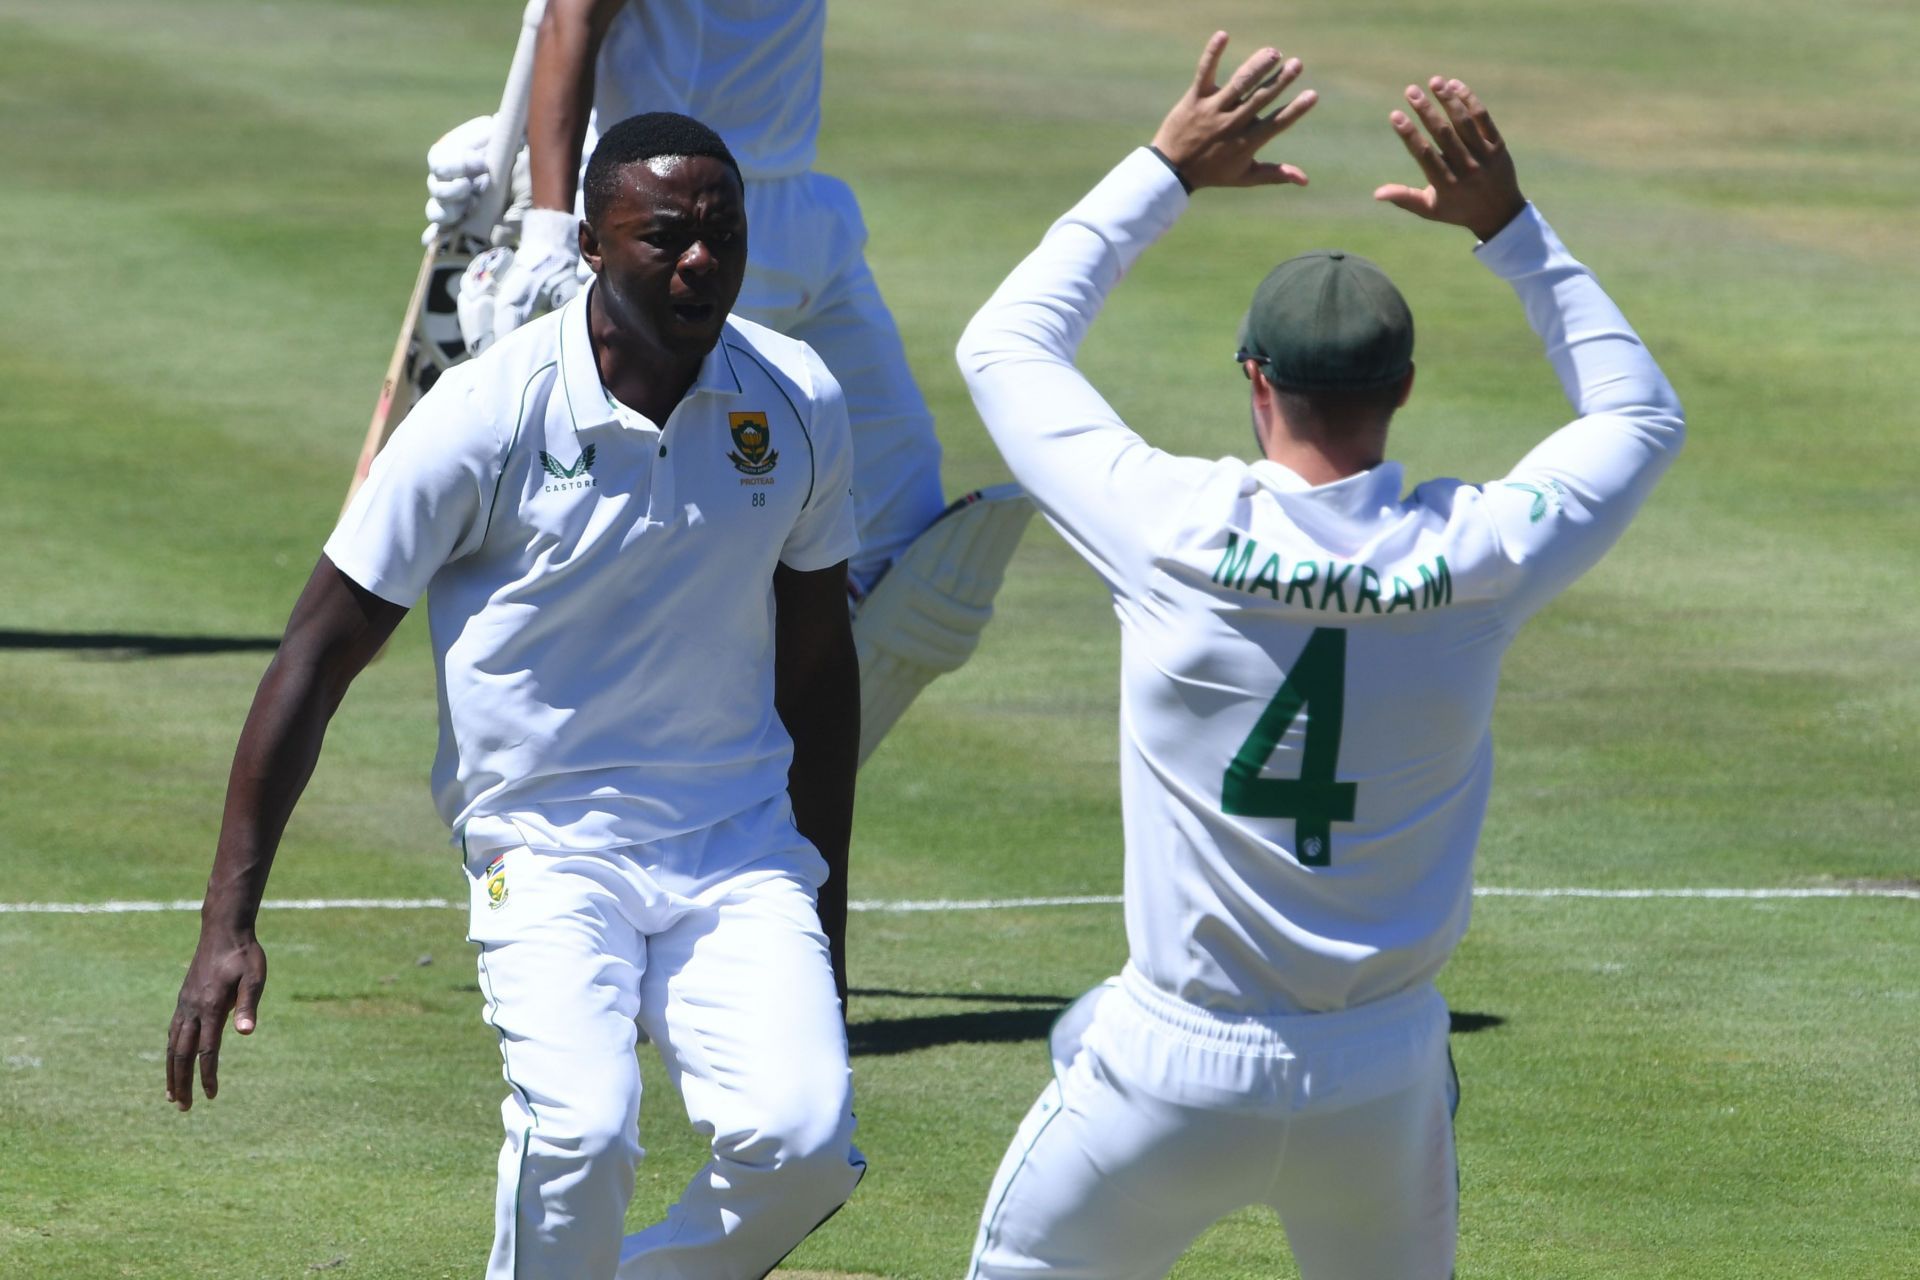 Aakash Chopra highlighted Kagiso Rabada&#039;s no-ball issues in this Test match